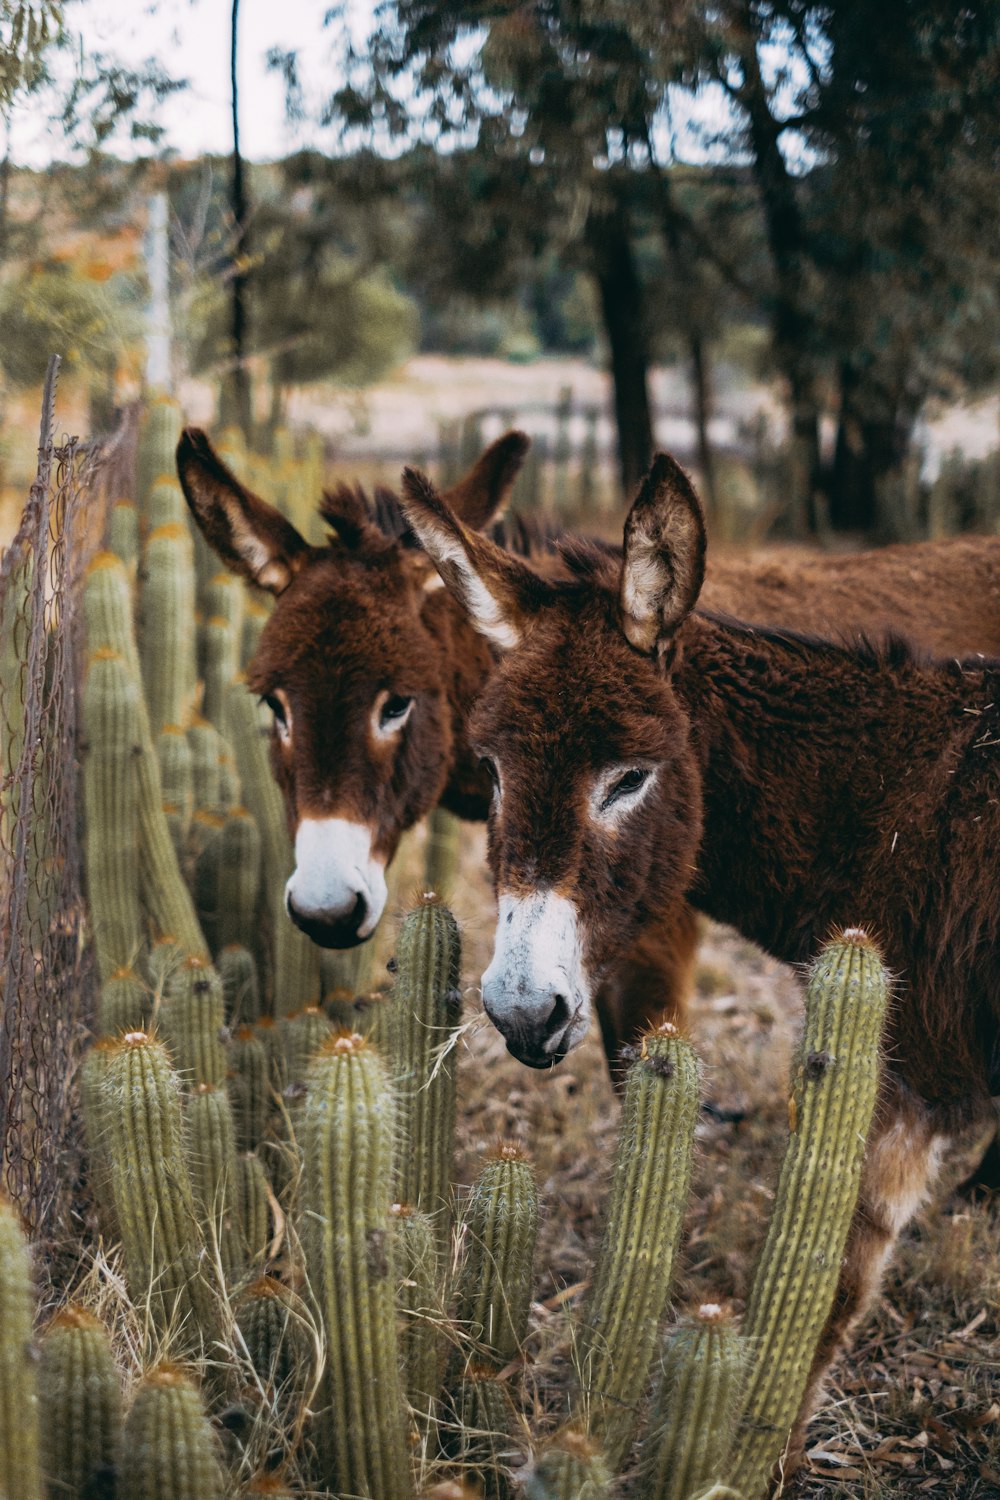 two donkeys standing next to each other near a cactus